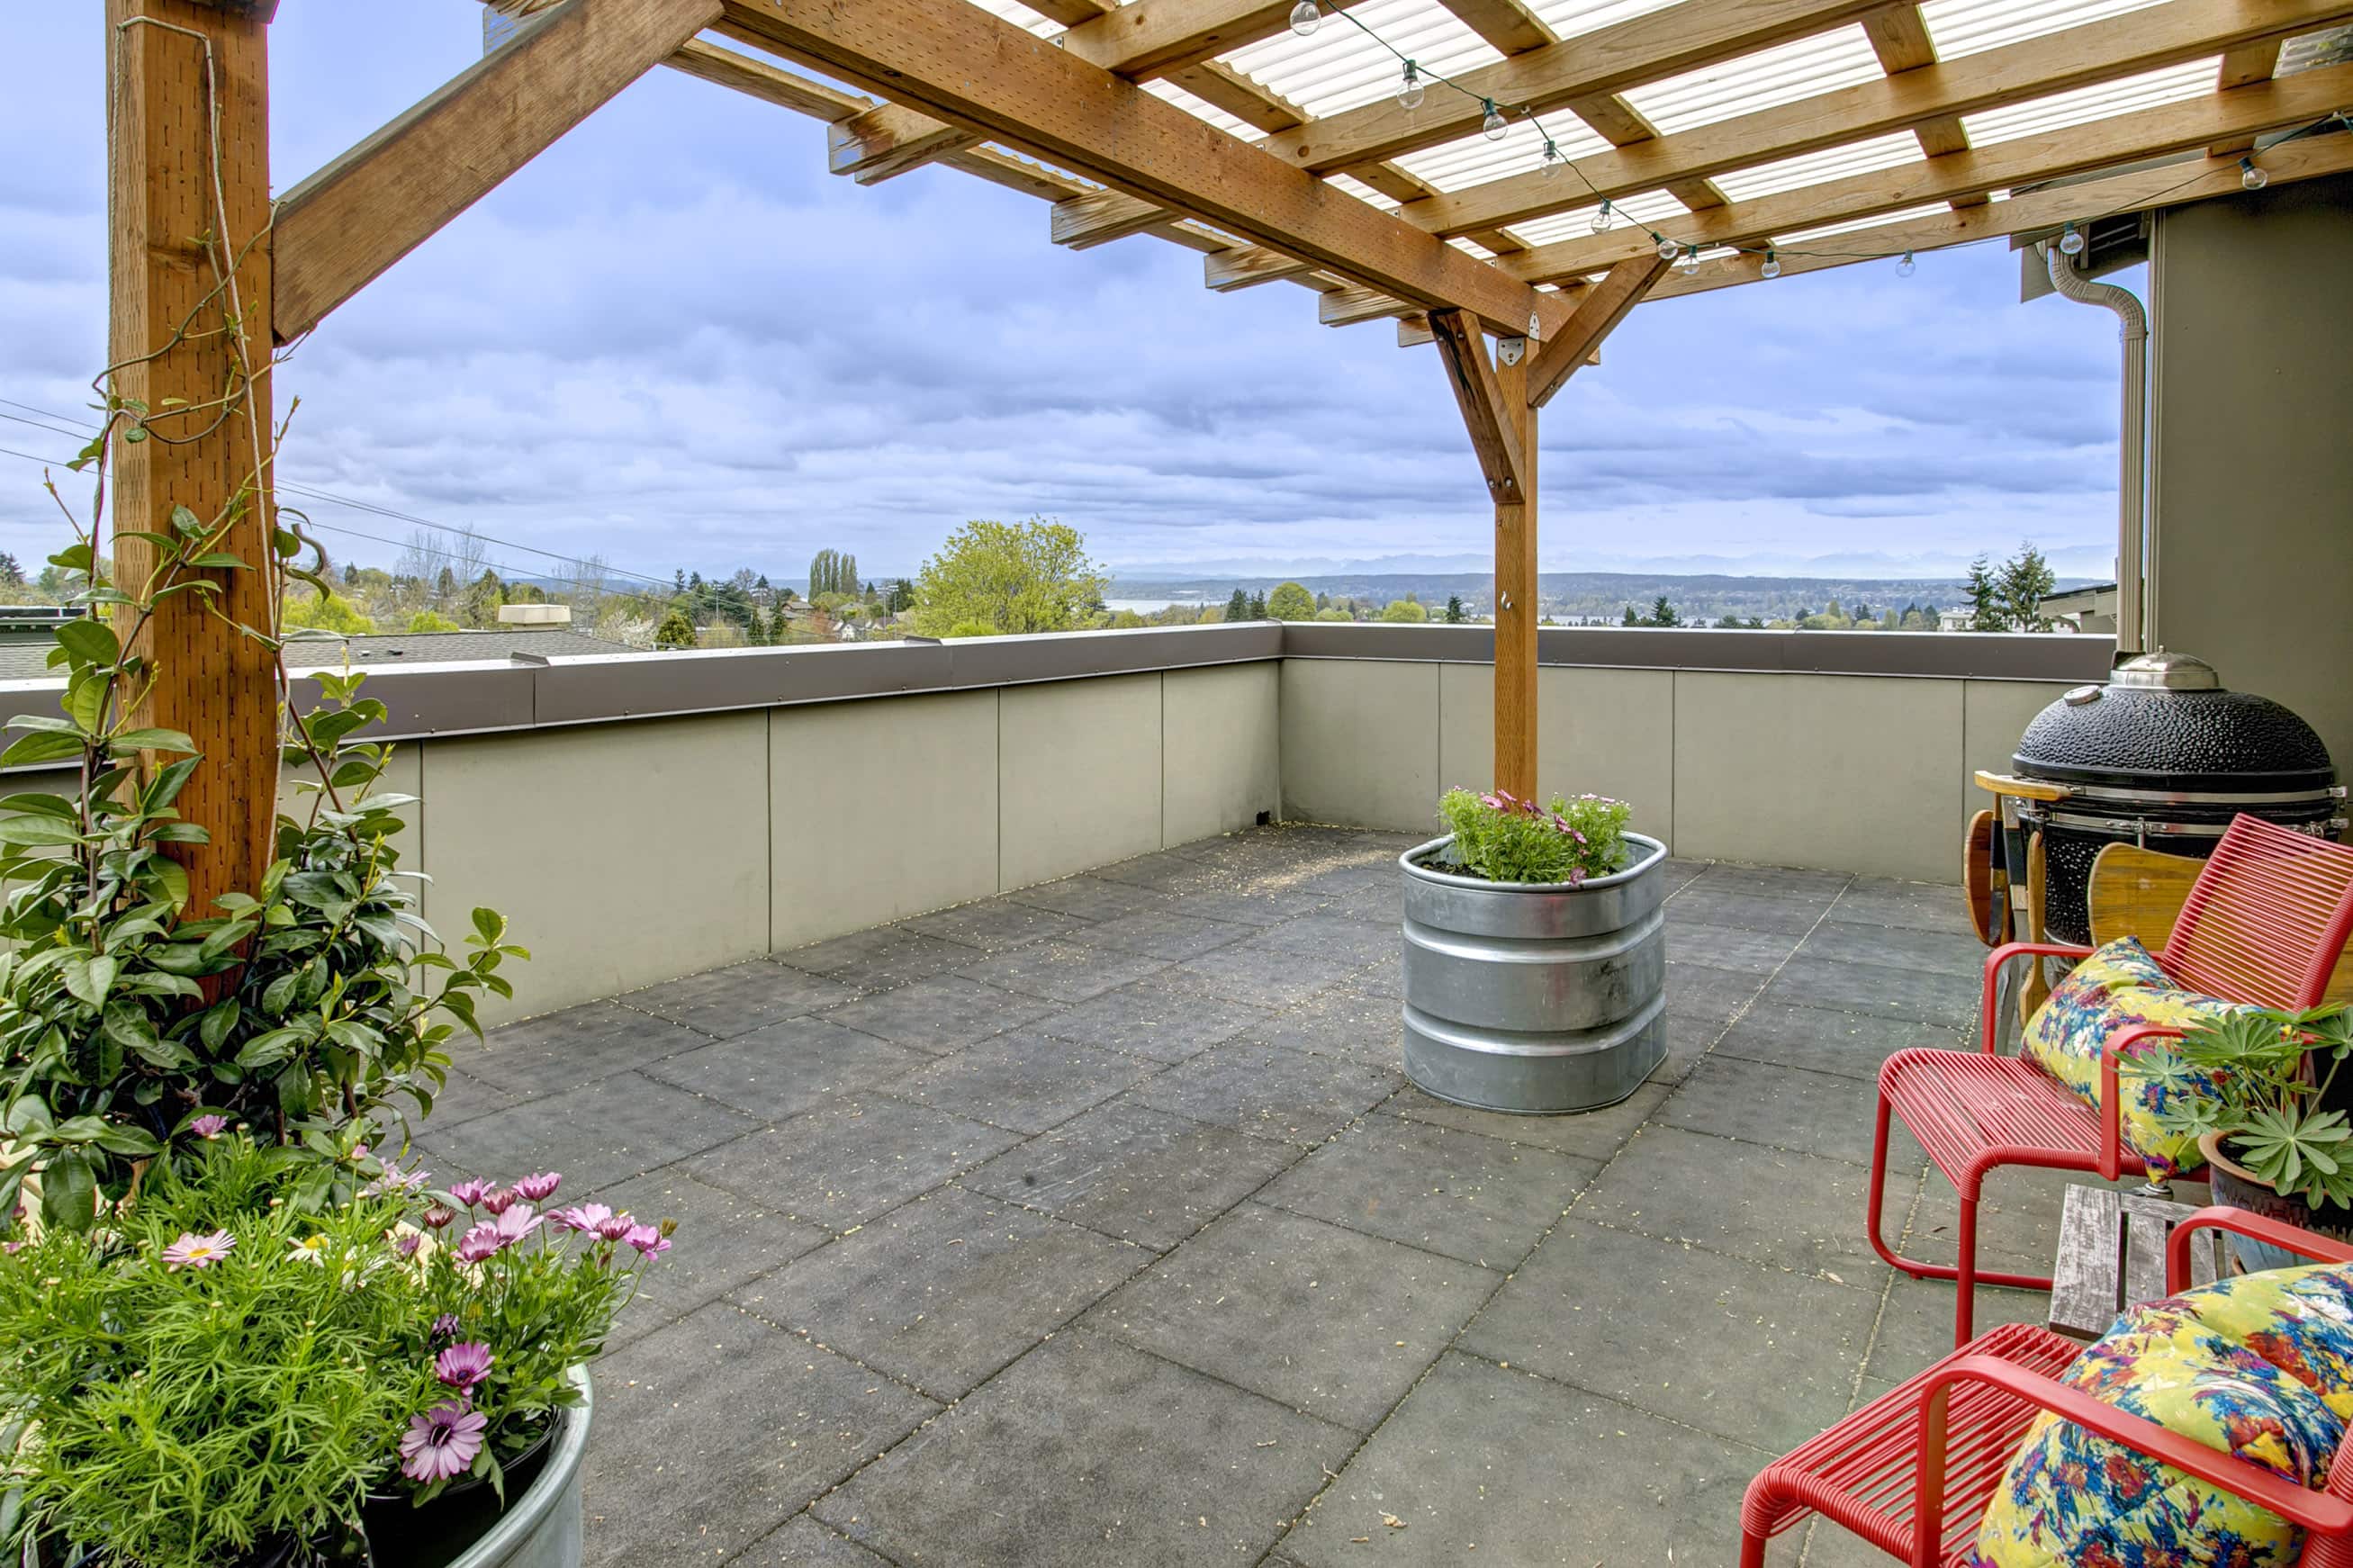 Grab a cup of coffee or a glass of wine and kick back on this stunning rooftop deck.